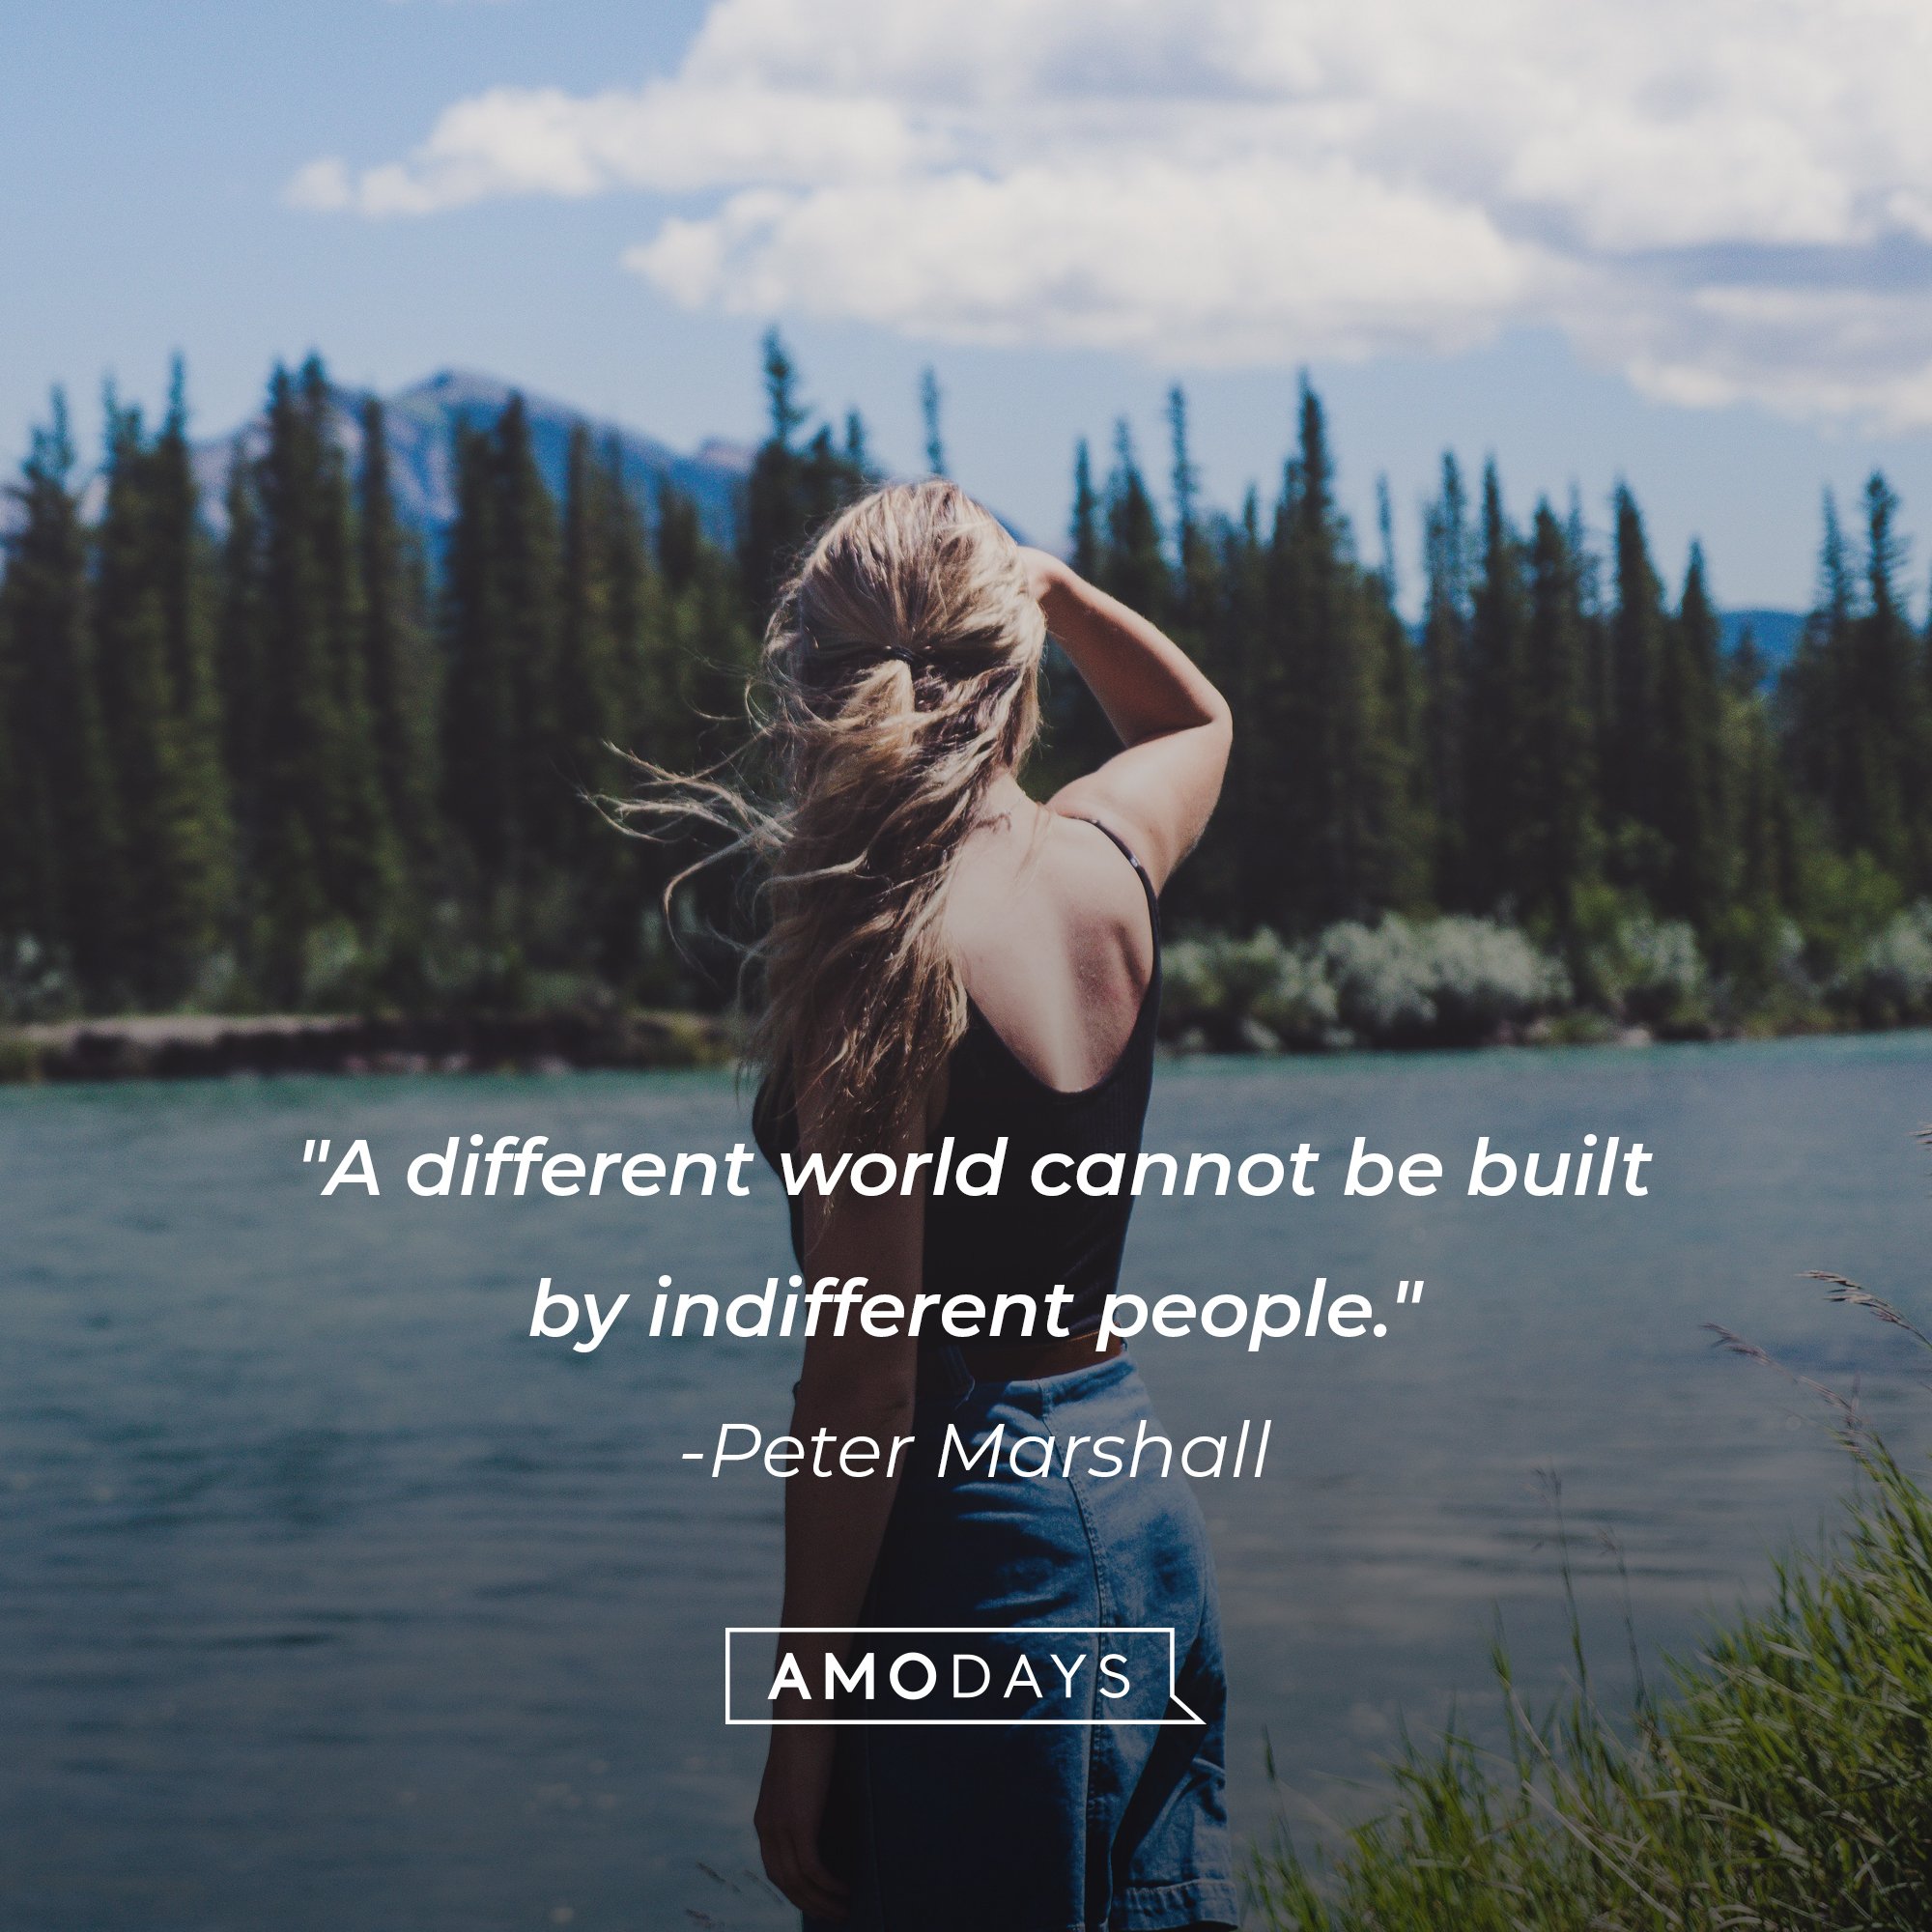 Peter Marshall's quote: "A different world cannot be built by indifferent people." | Image: AmoDays